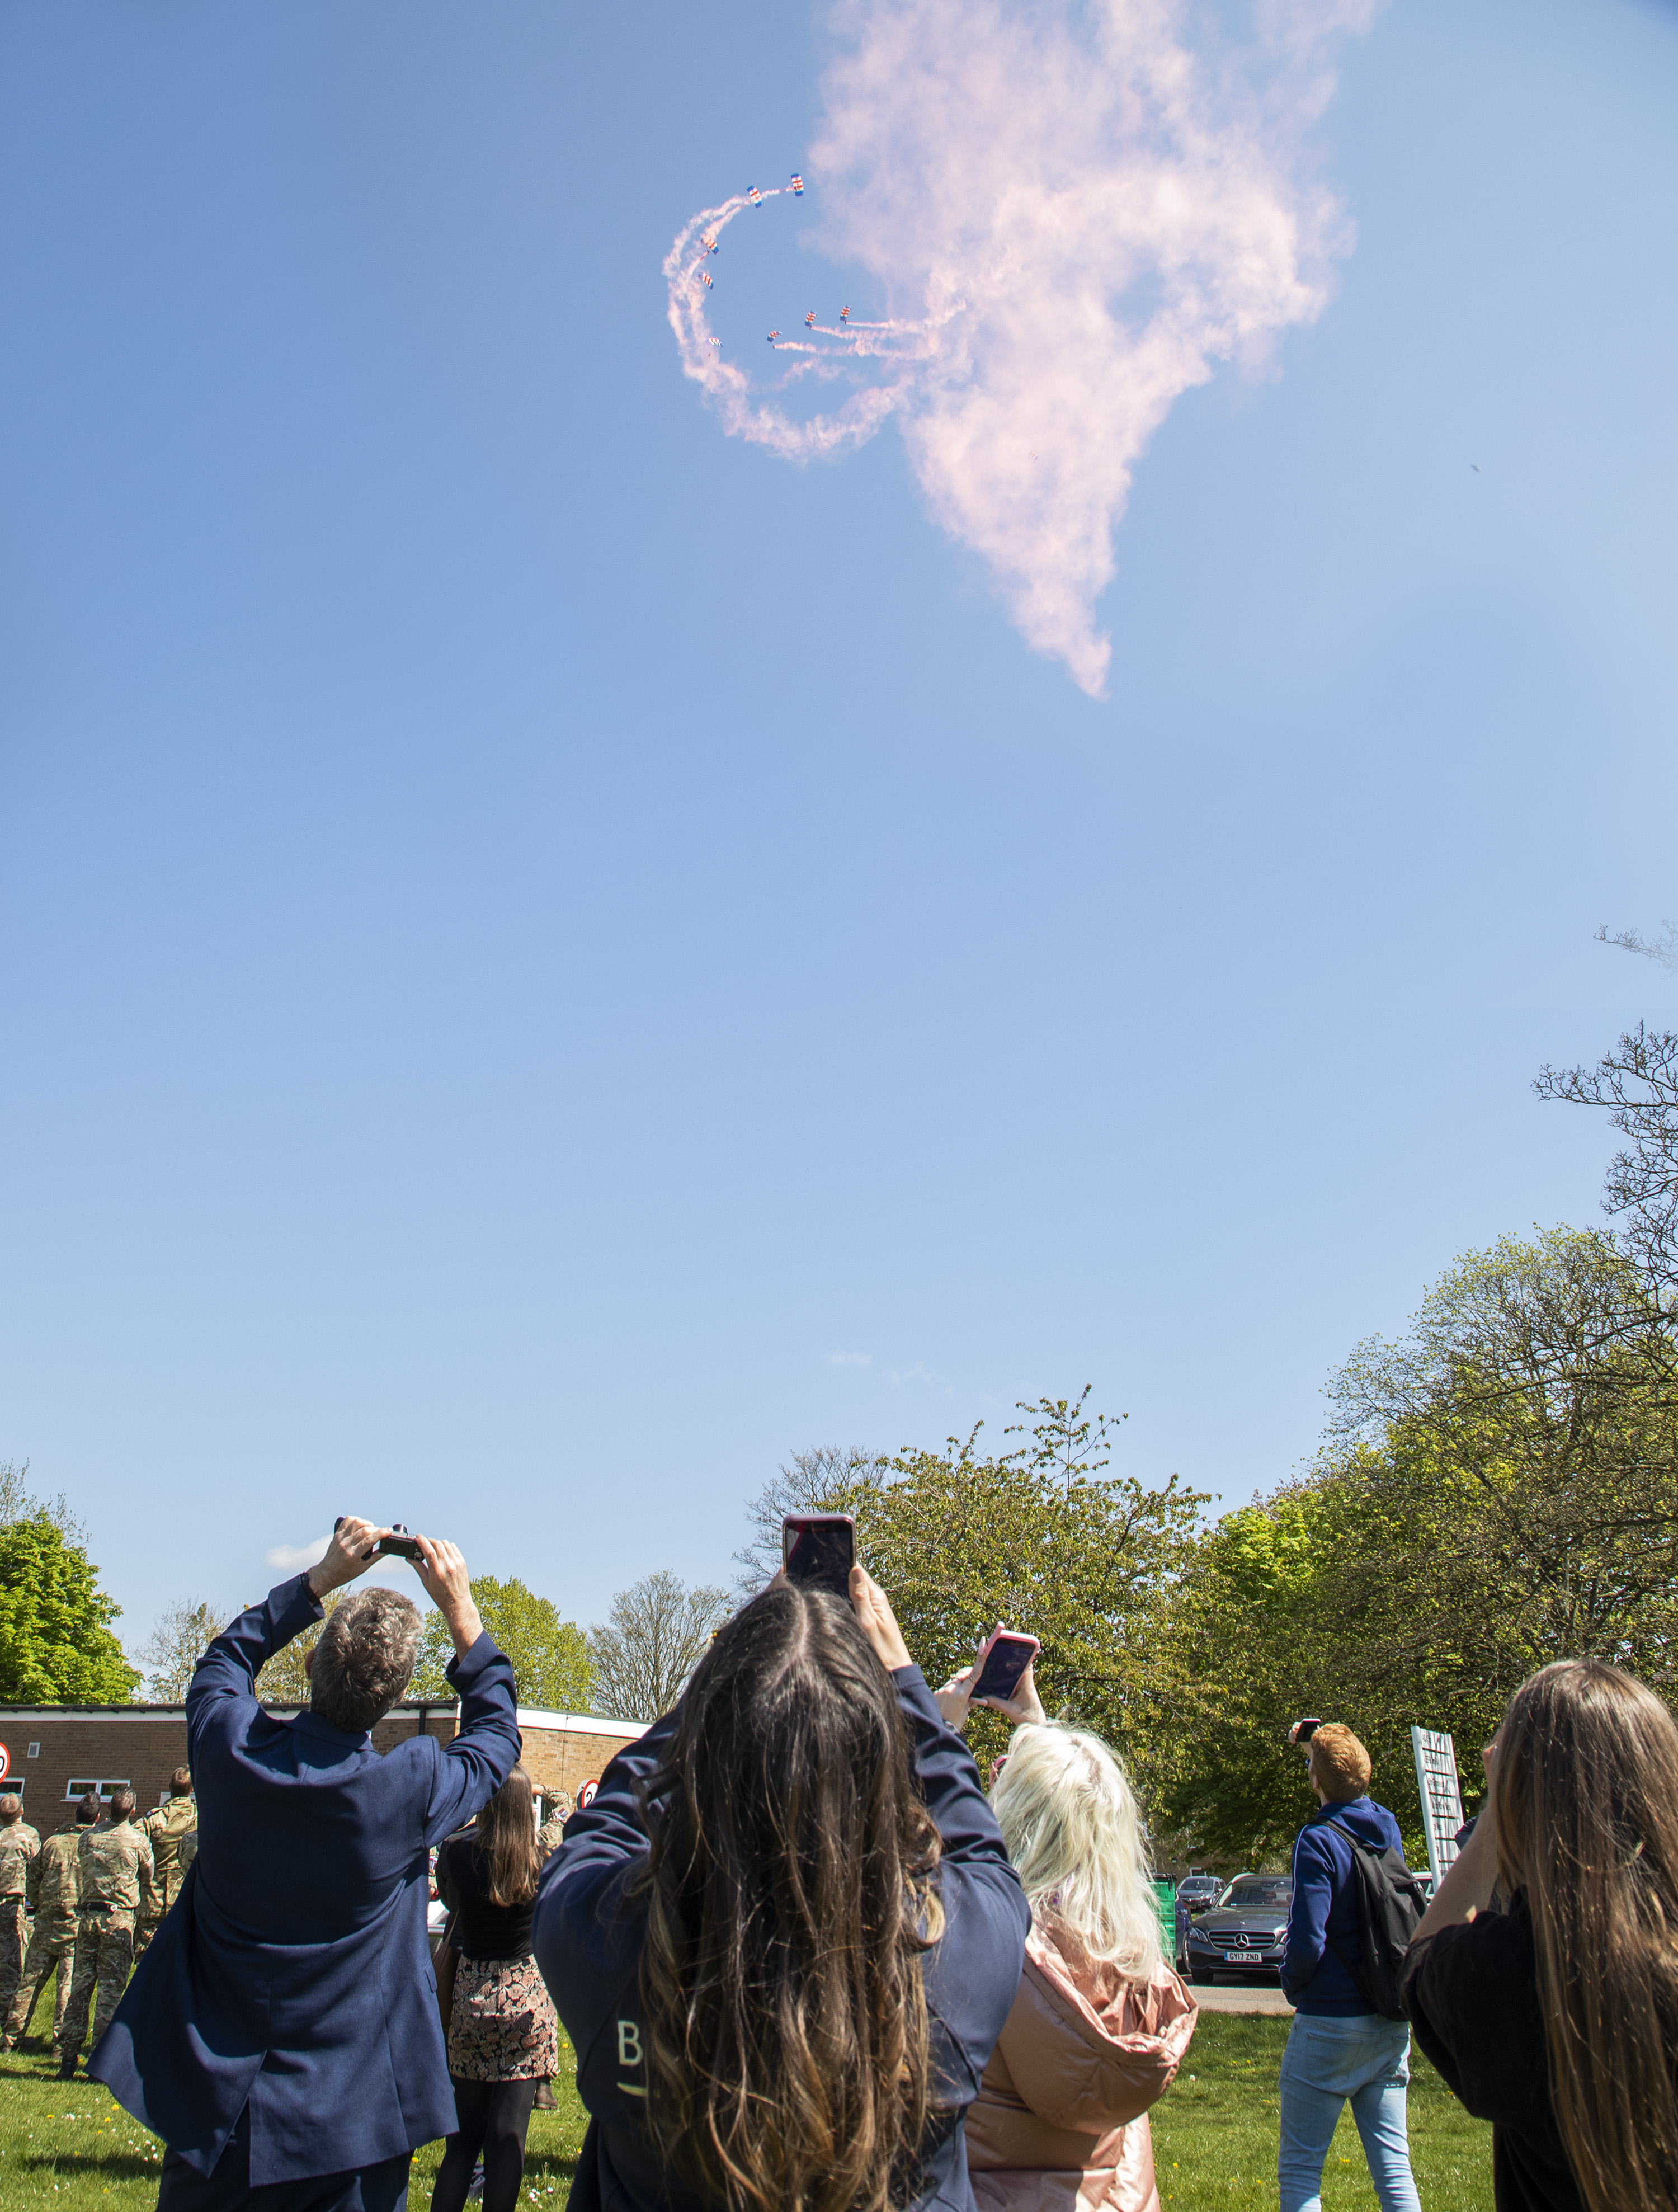 Today (26th April) the RAF Falcons officially began their 2022 season with a spectacular display at RAF Brize Norton, their home base, in front of local schools, sponsors and senior military.